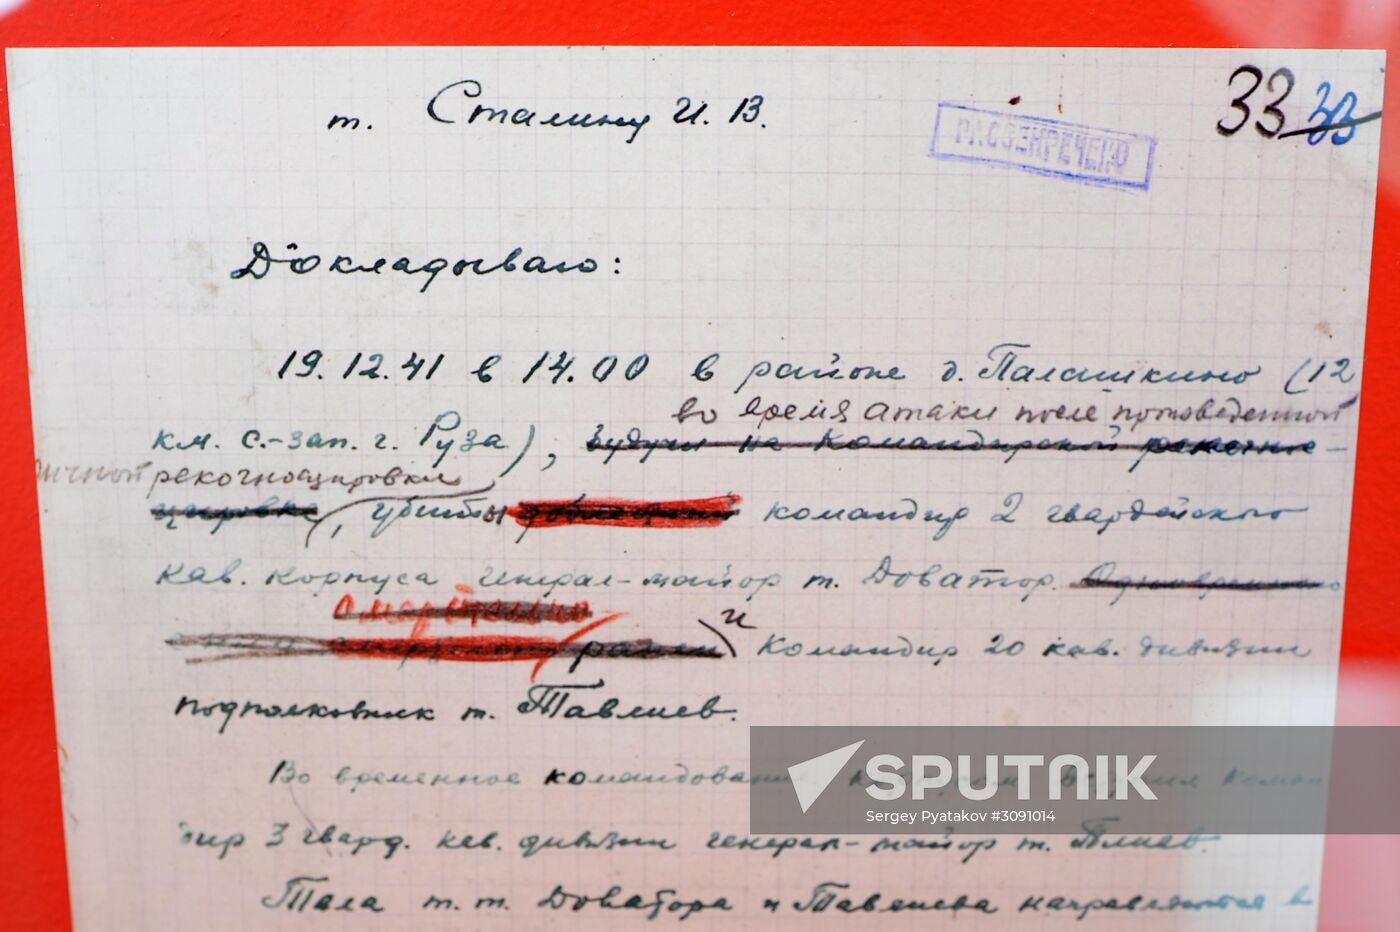 Historical document exhibition "1942: The Headquarters of Victory" unveiled